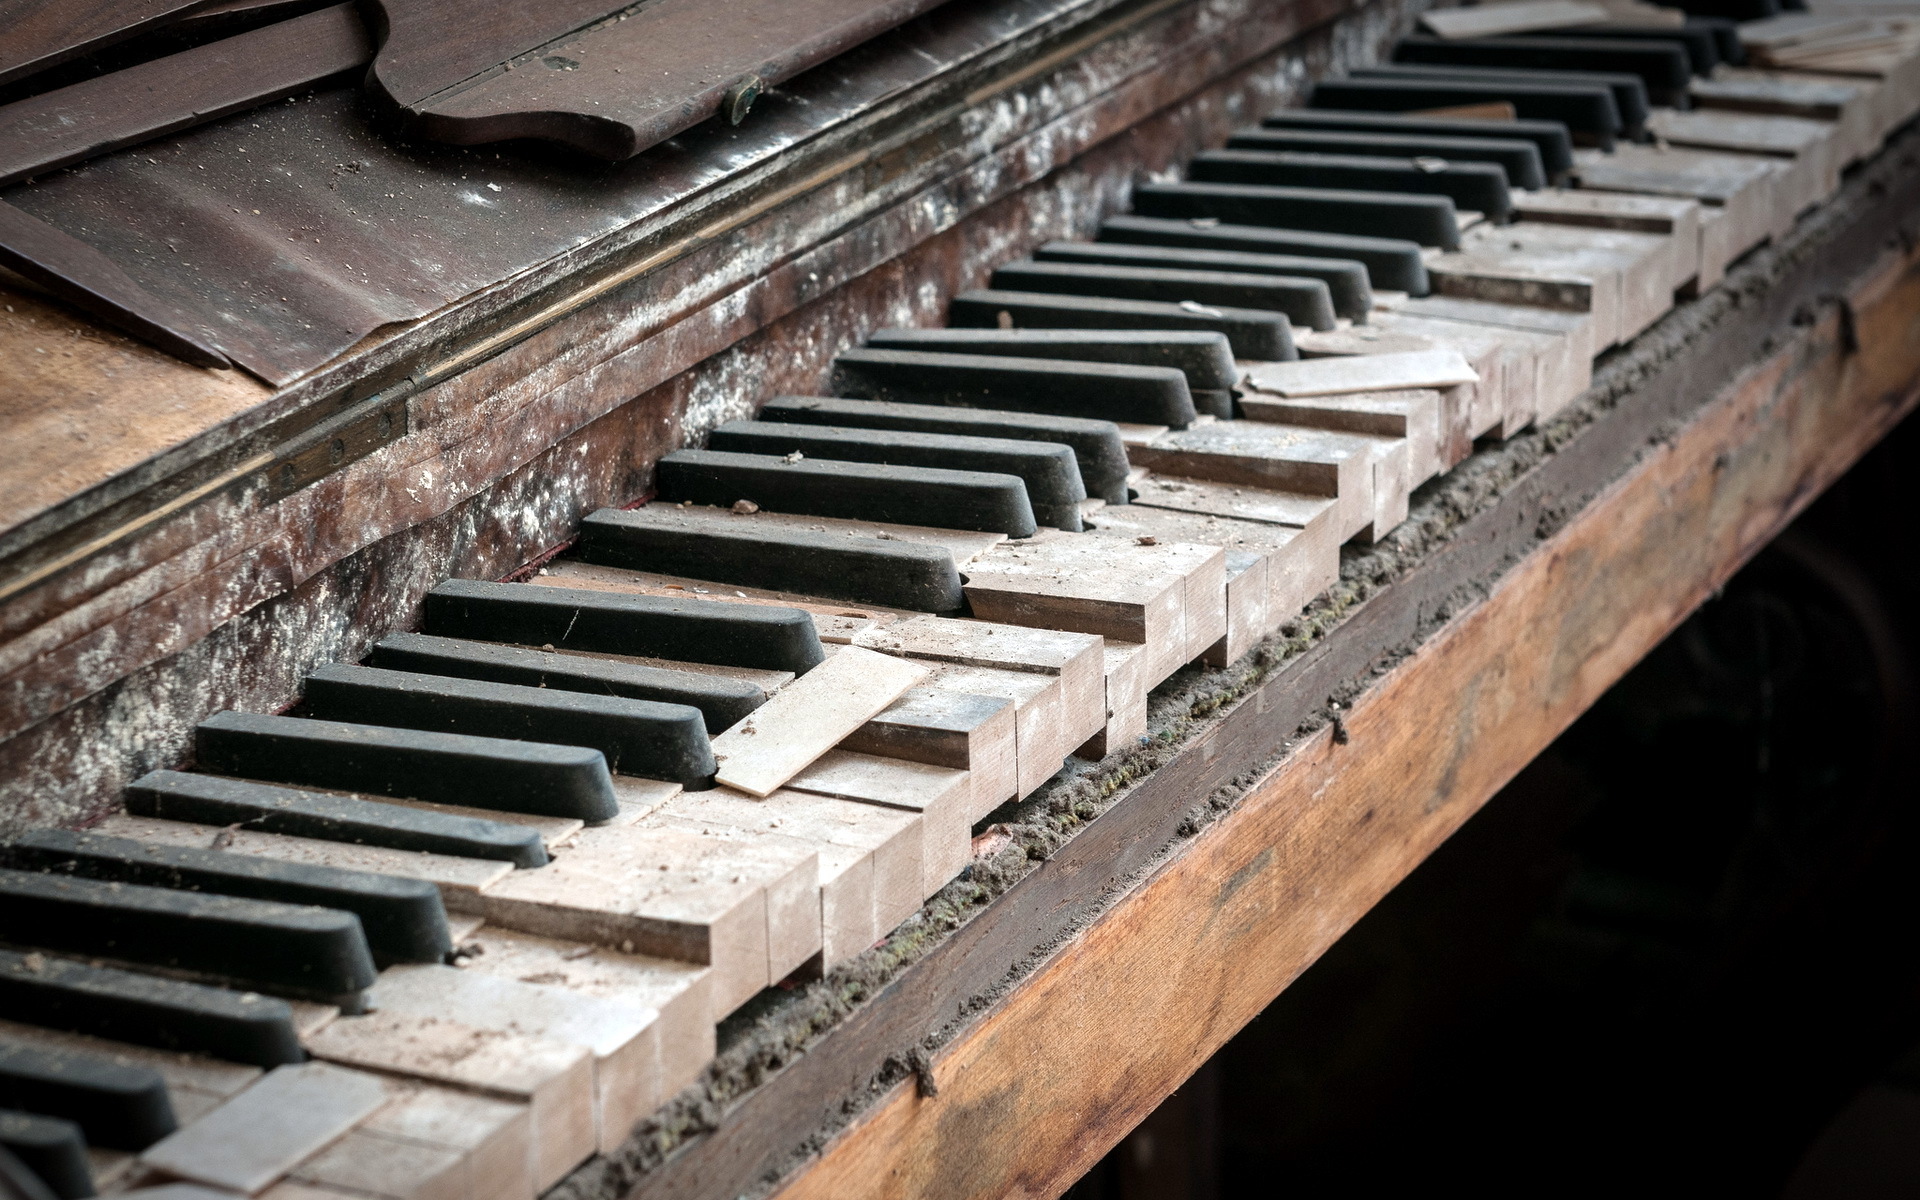 old piano keys keyboards   Background Wallpapers for your